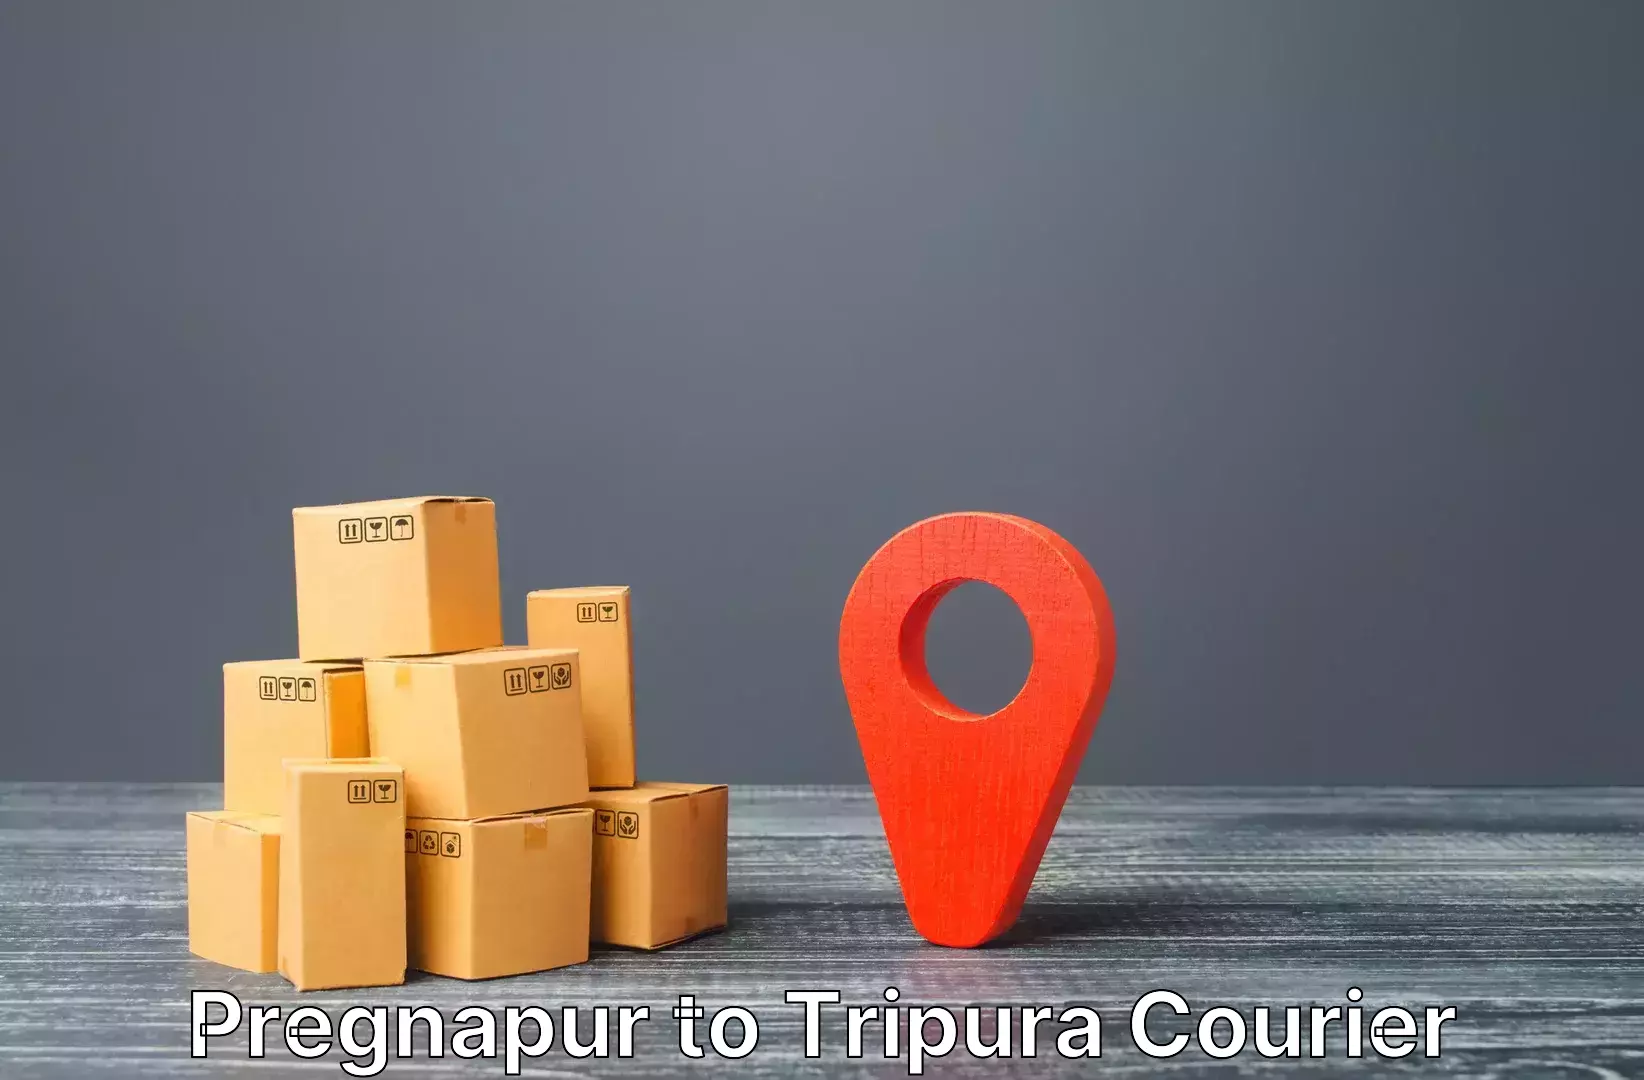 Short distance baggage courier in Pregnapur to Udaipur Tripura